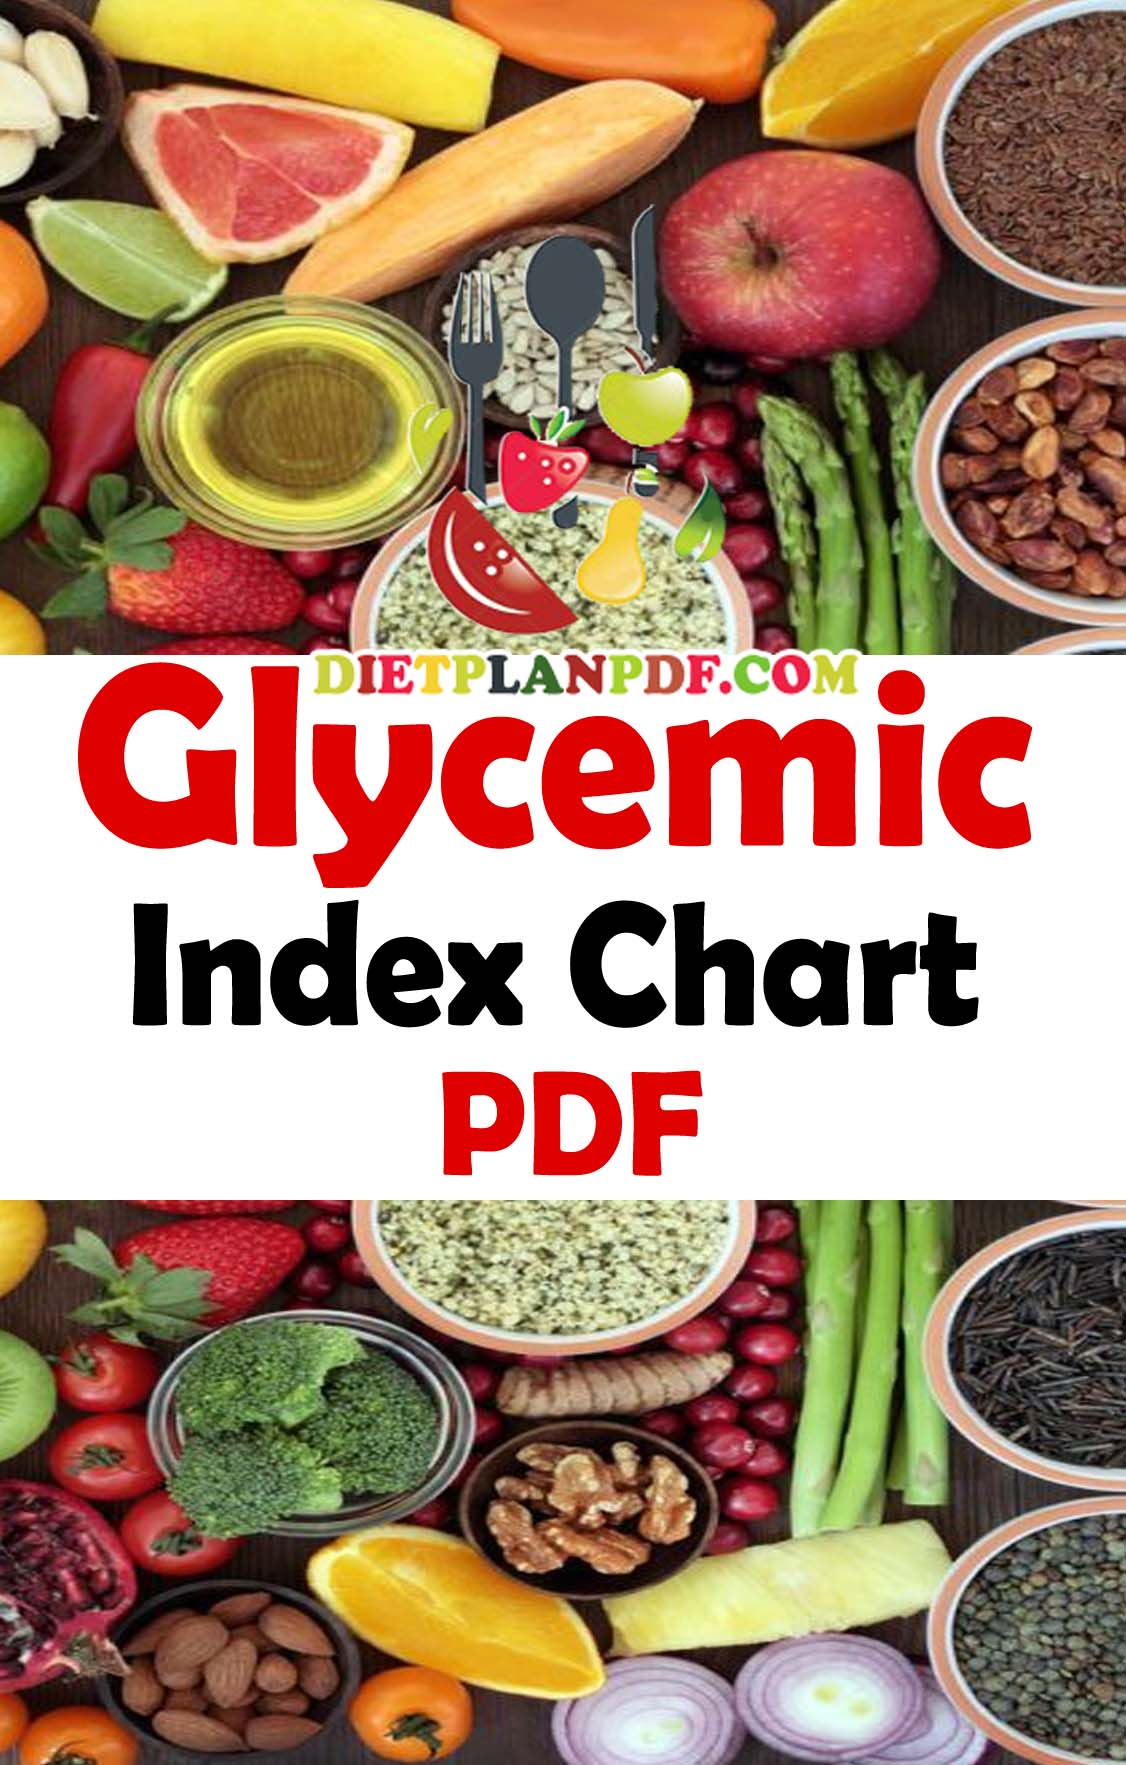 Glycemic Index Chart PDF – What It Is & How To Use It